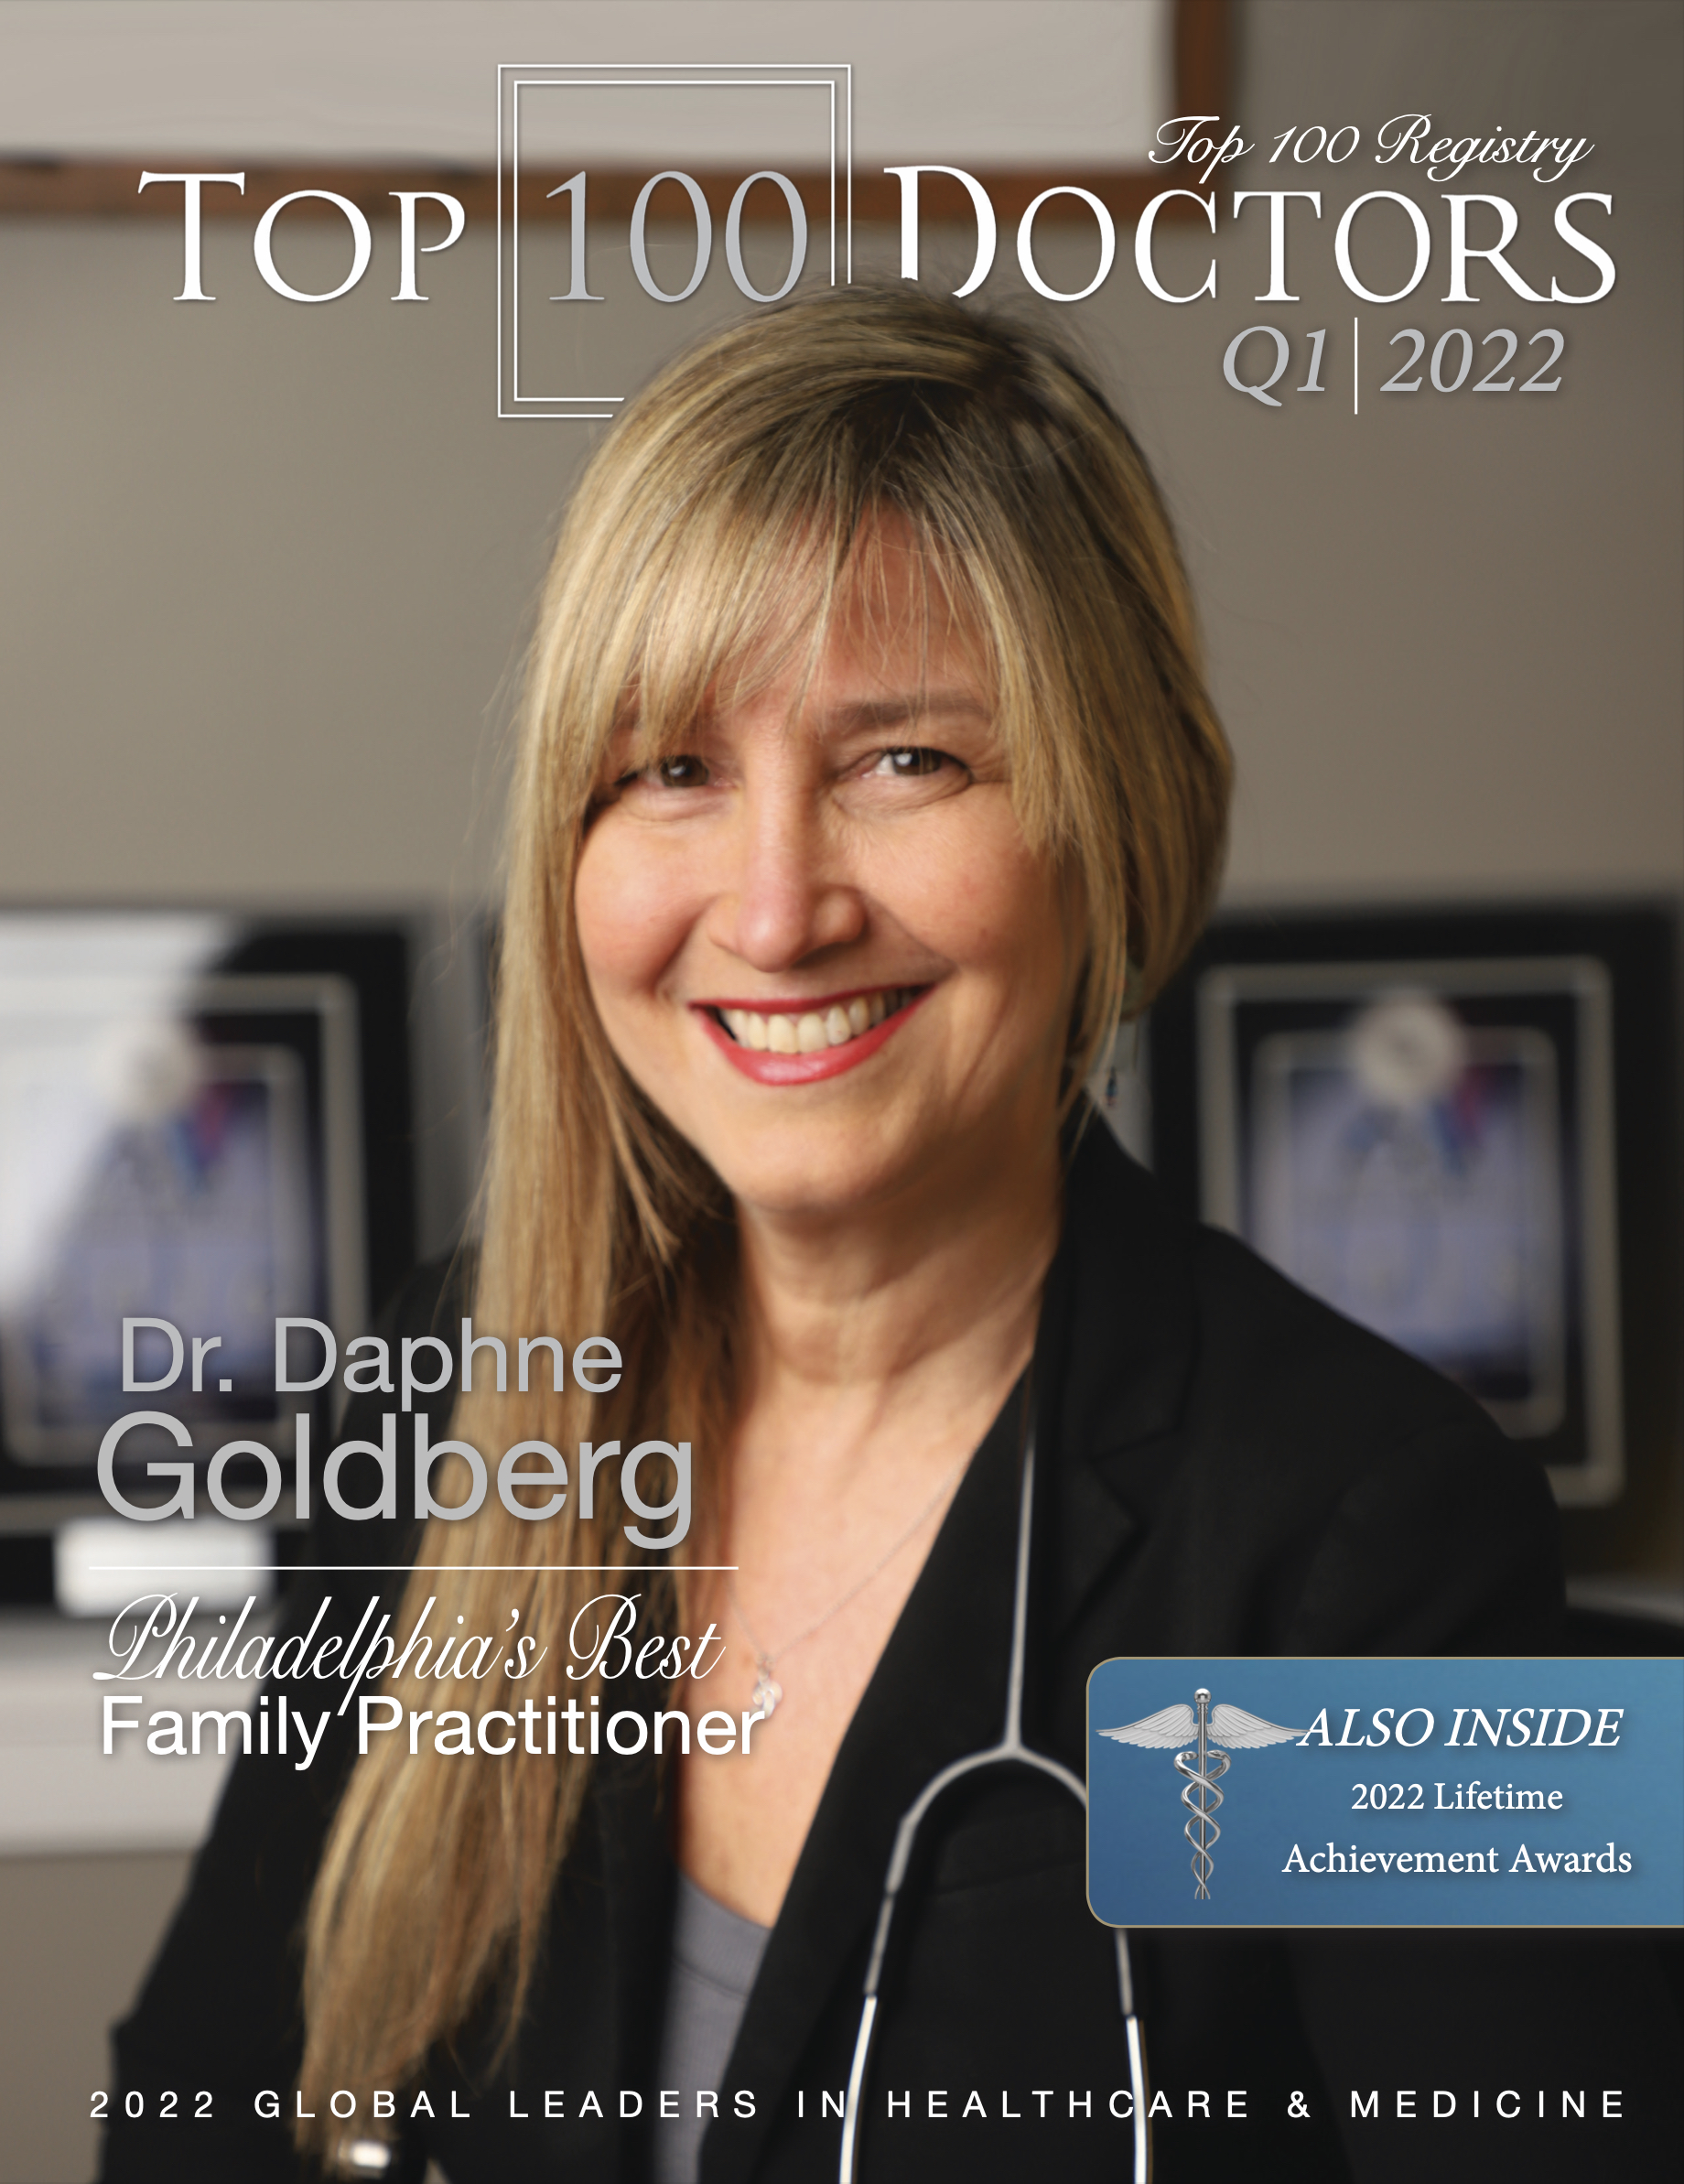 Dr. Daphne Goldberg is Being Honored by the Top 100 Registry, and Due to be Featured on the Front Cover of the 2022 Top 100 Doctors, Q1 Edition